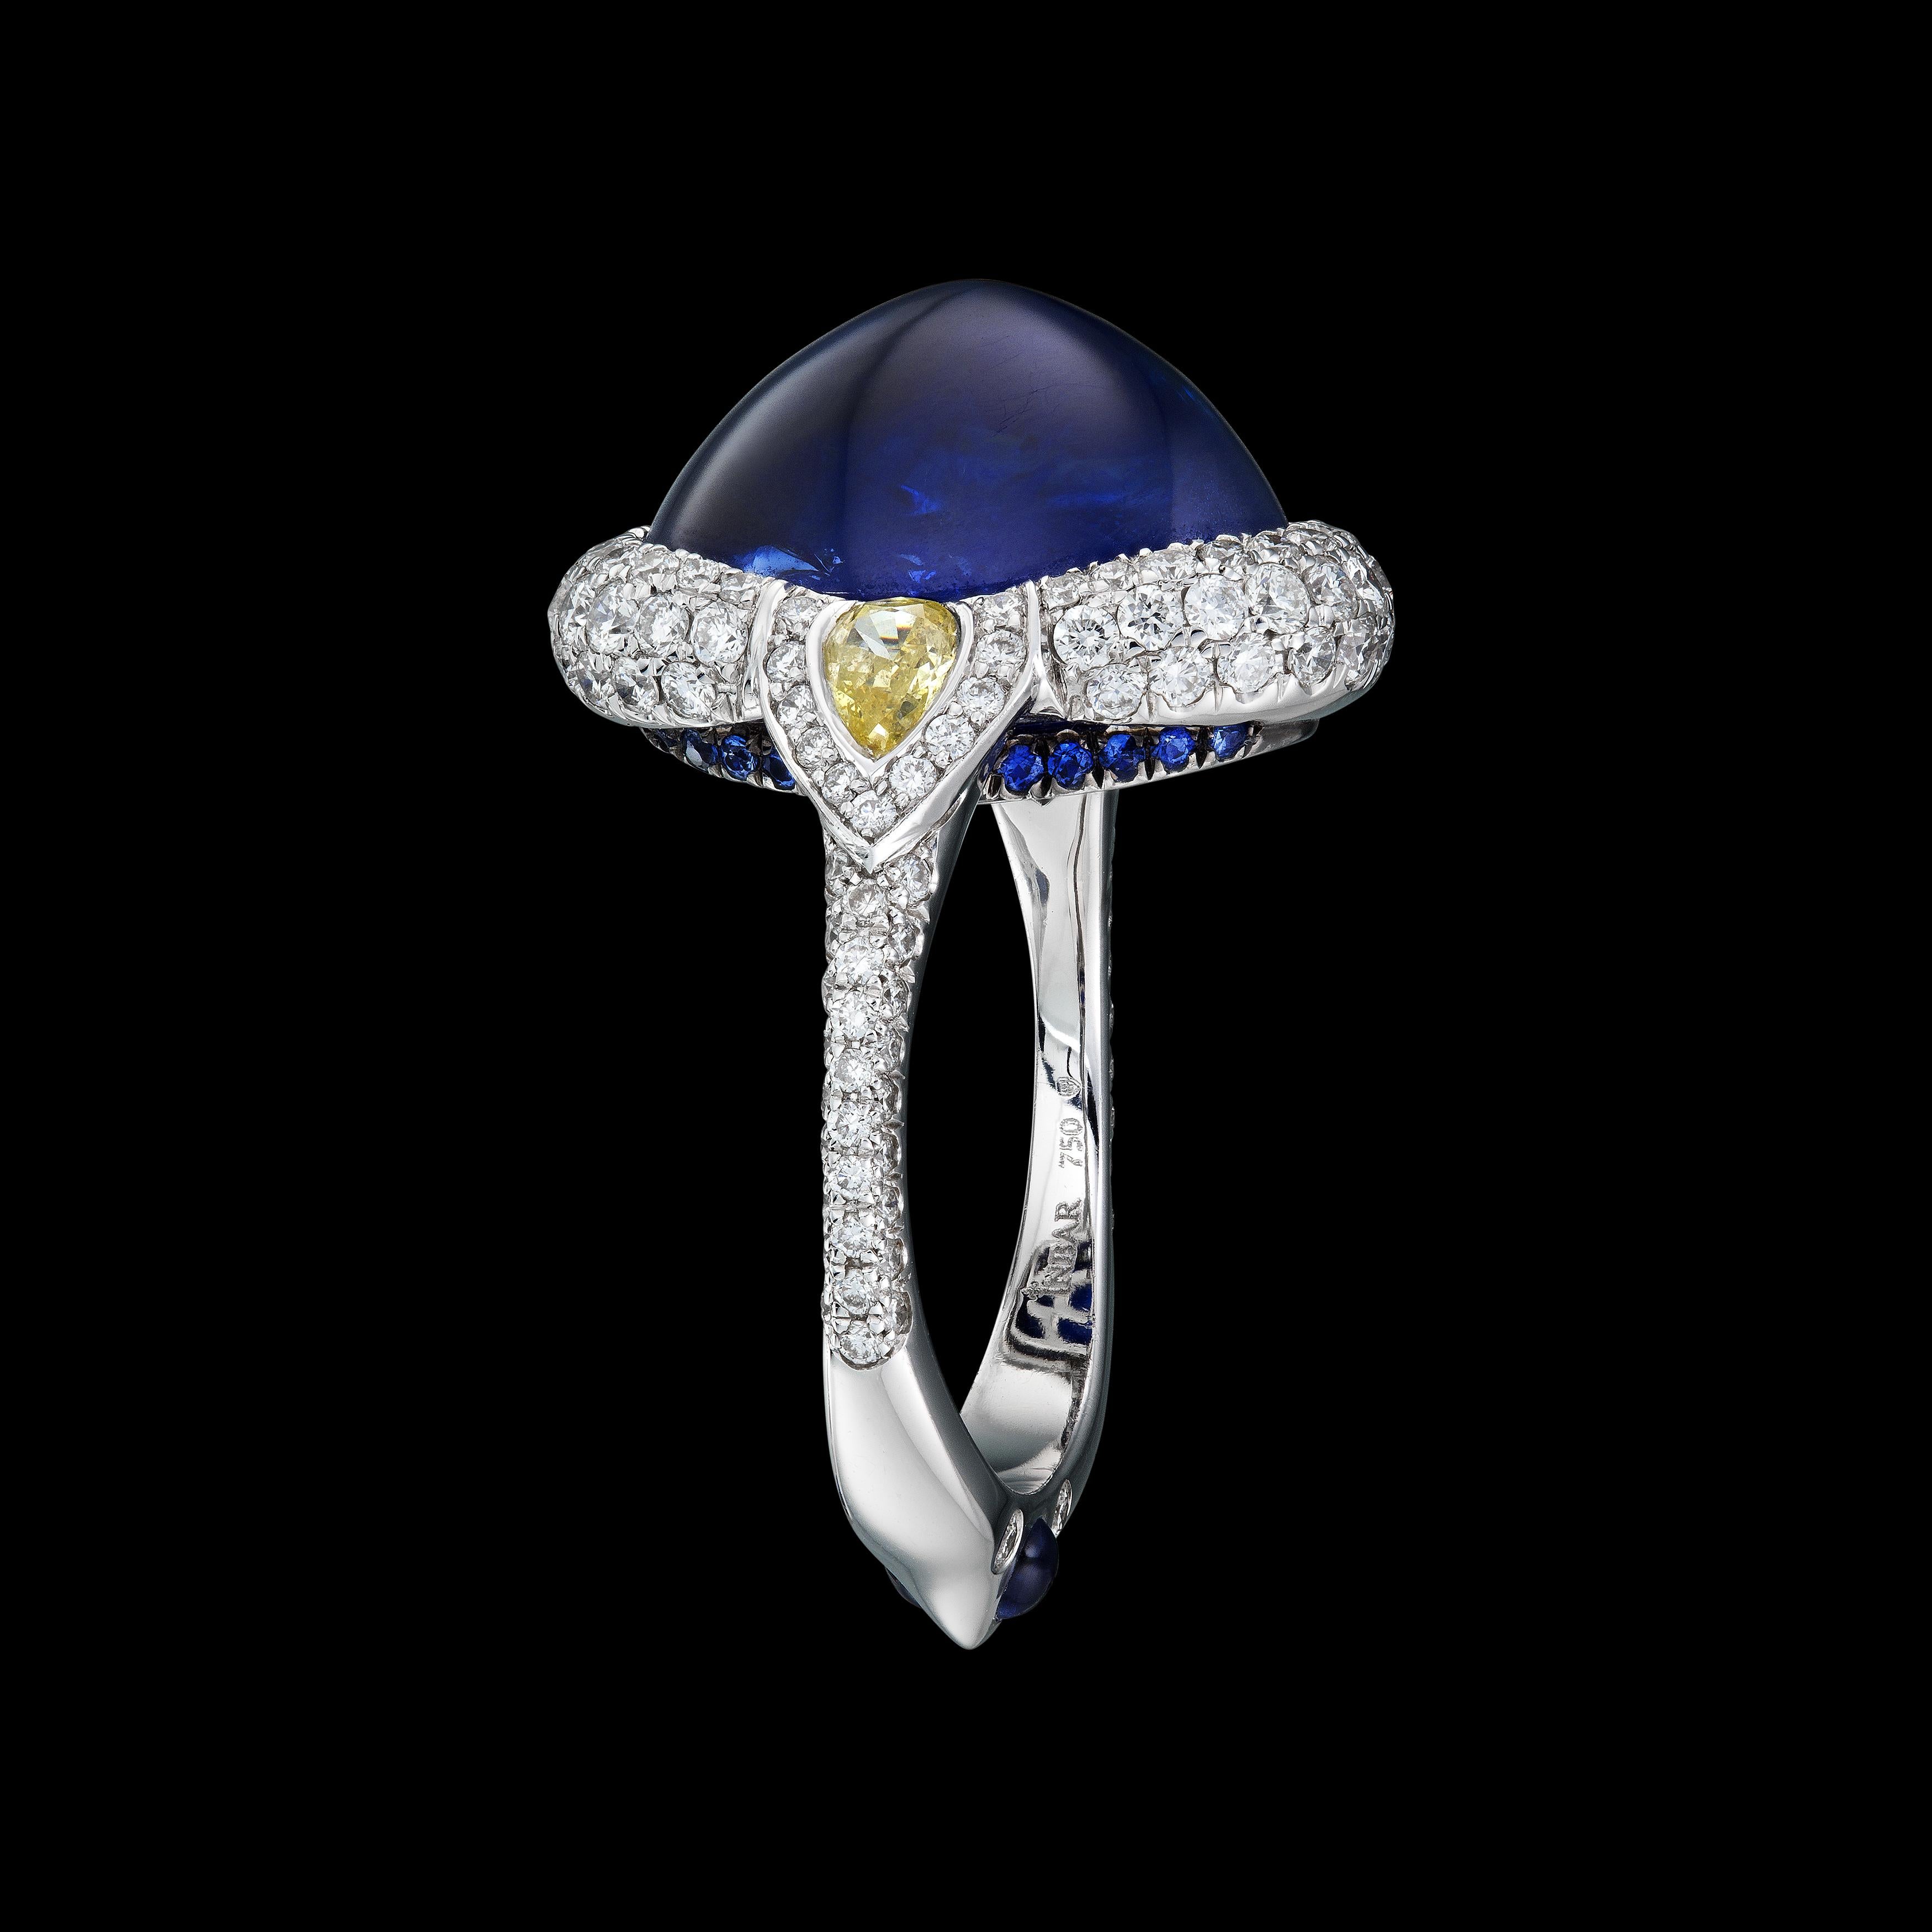 GRS certified 13.57 carat royal blue Suferloaf sapphire ring with white and fancy yellow diamonds, white 18k gold and small sapphires.